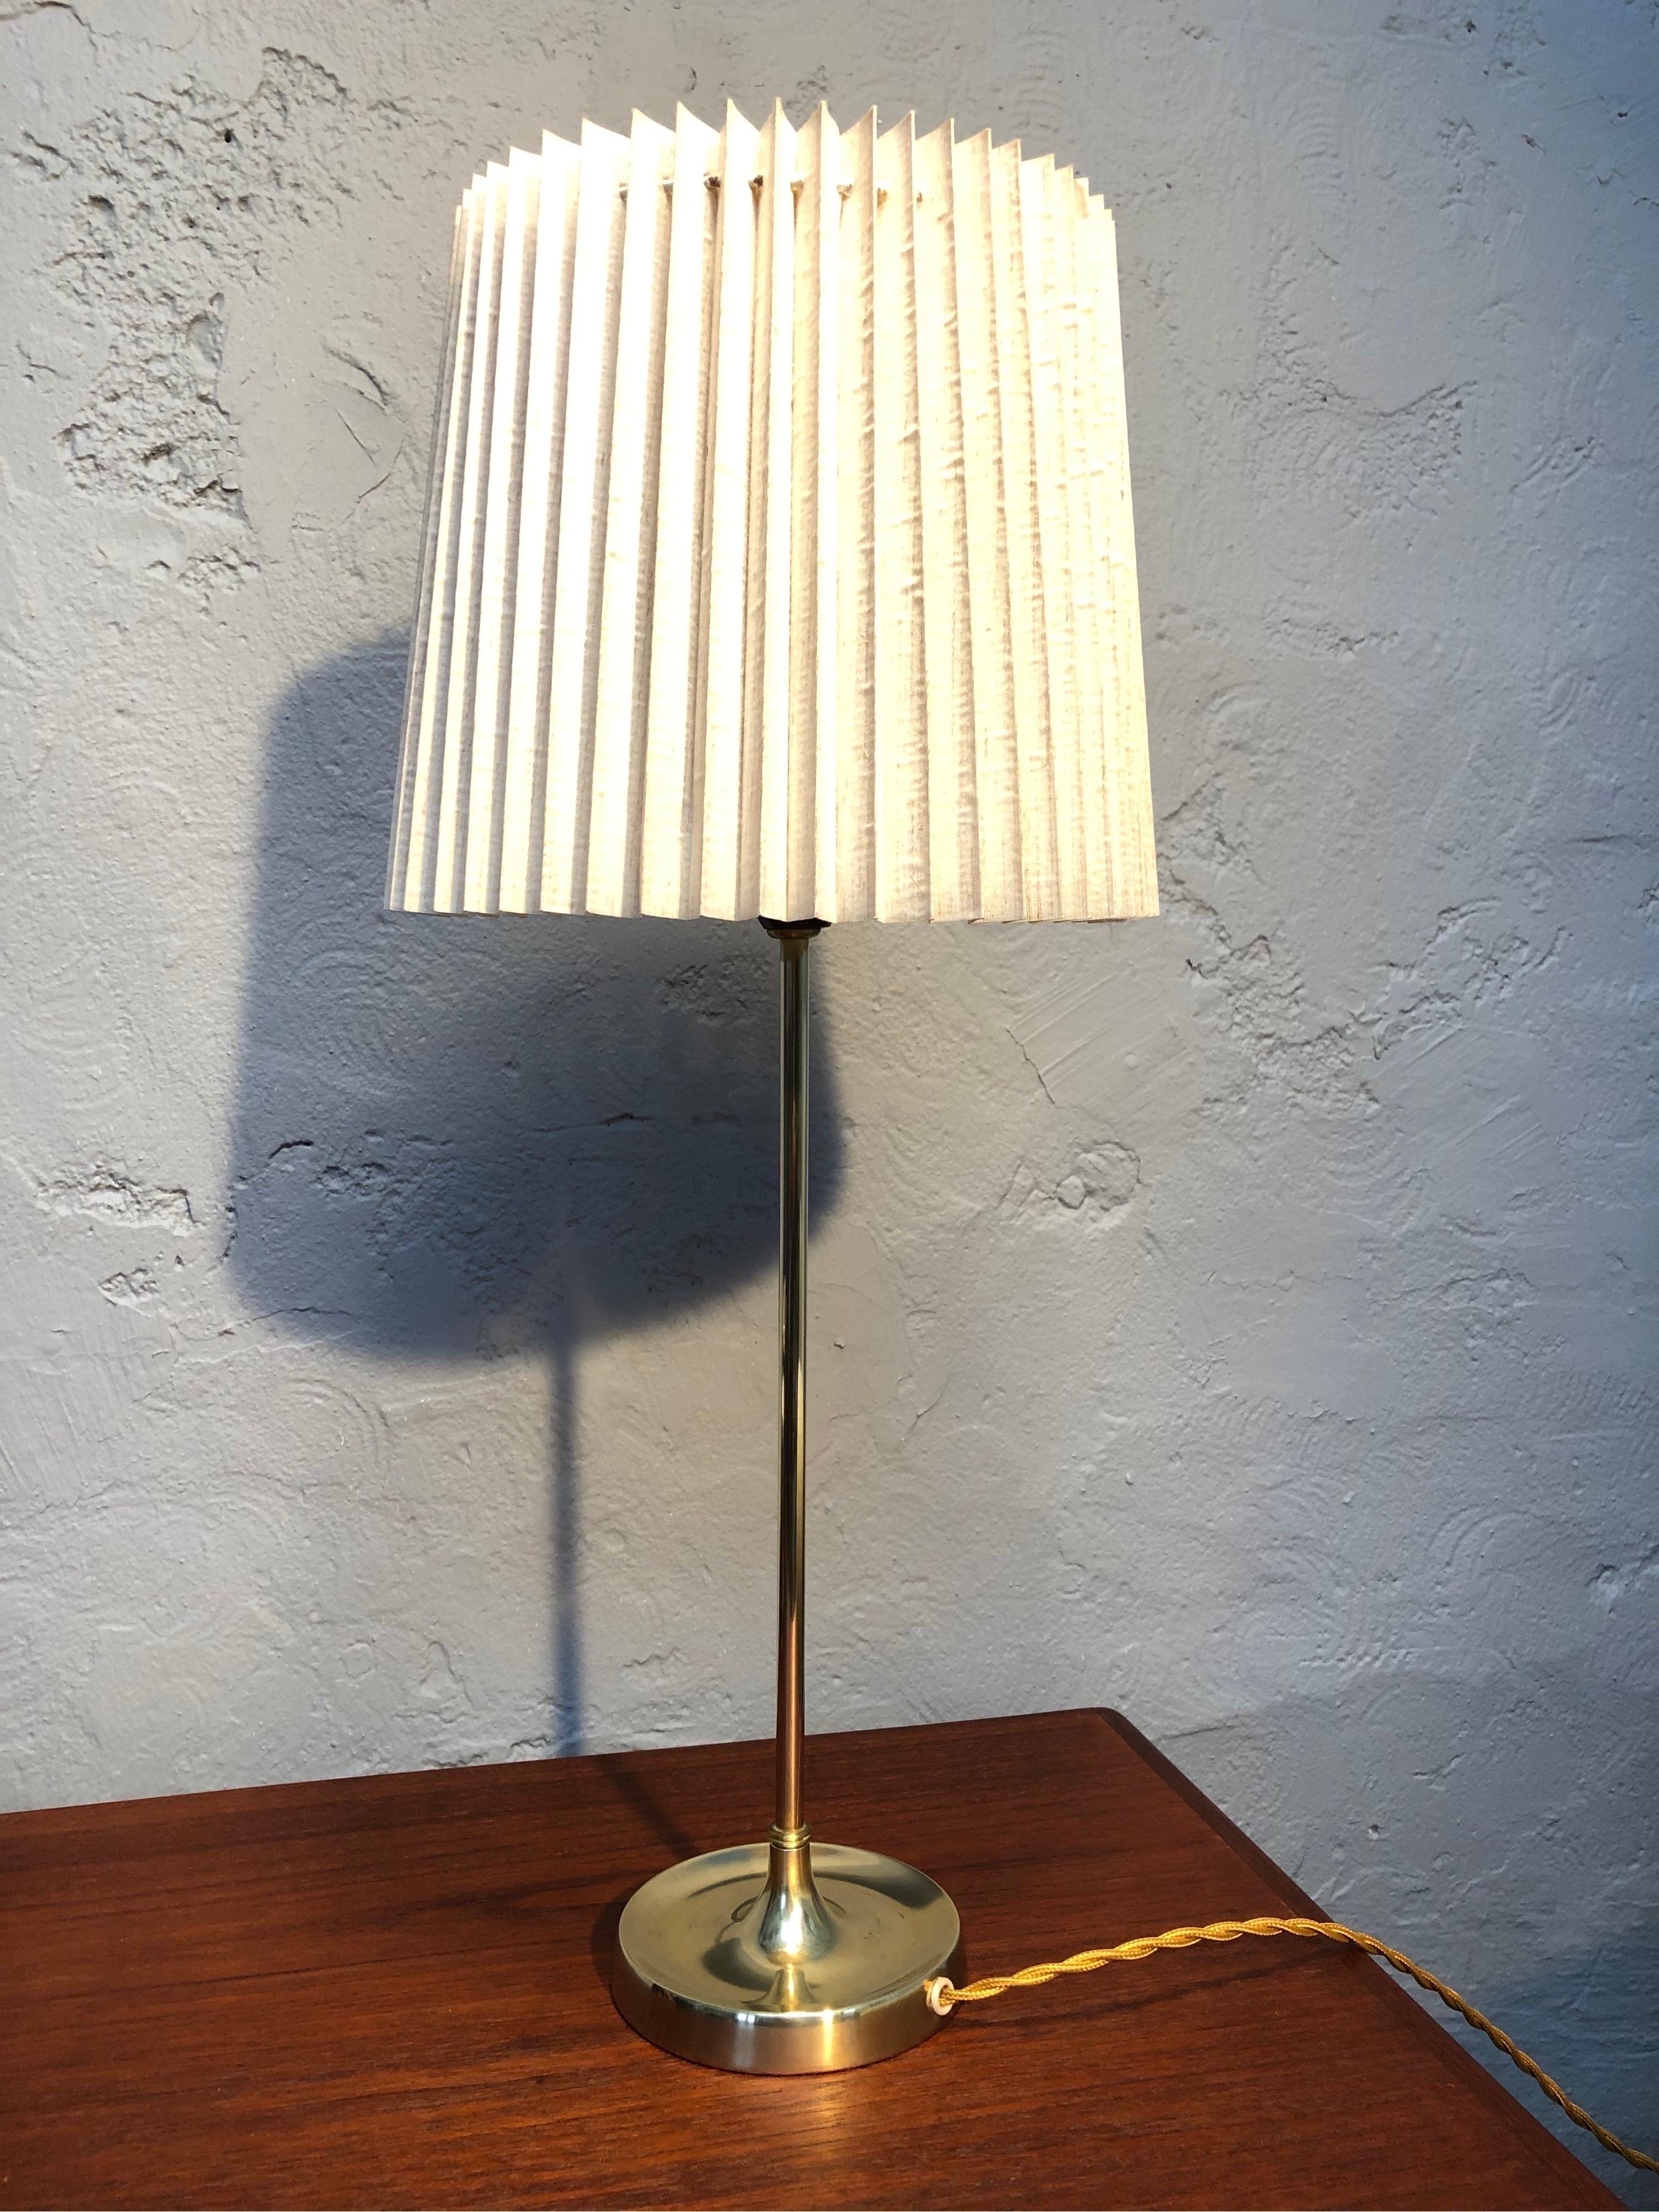 Vintage Pair of Brass Table Lamps by Esben Klint for Le Klint from the 1950s 6